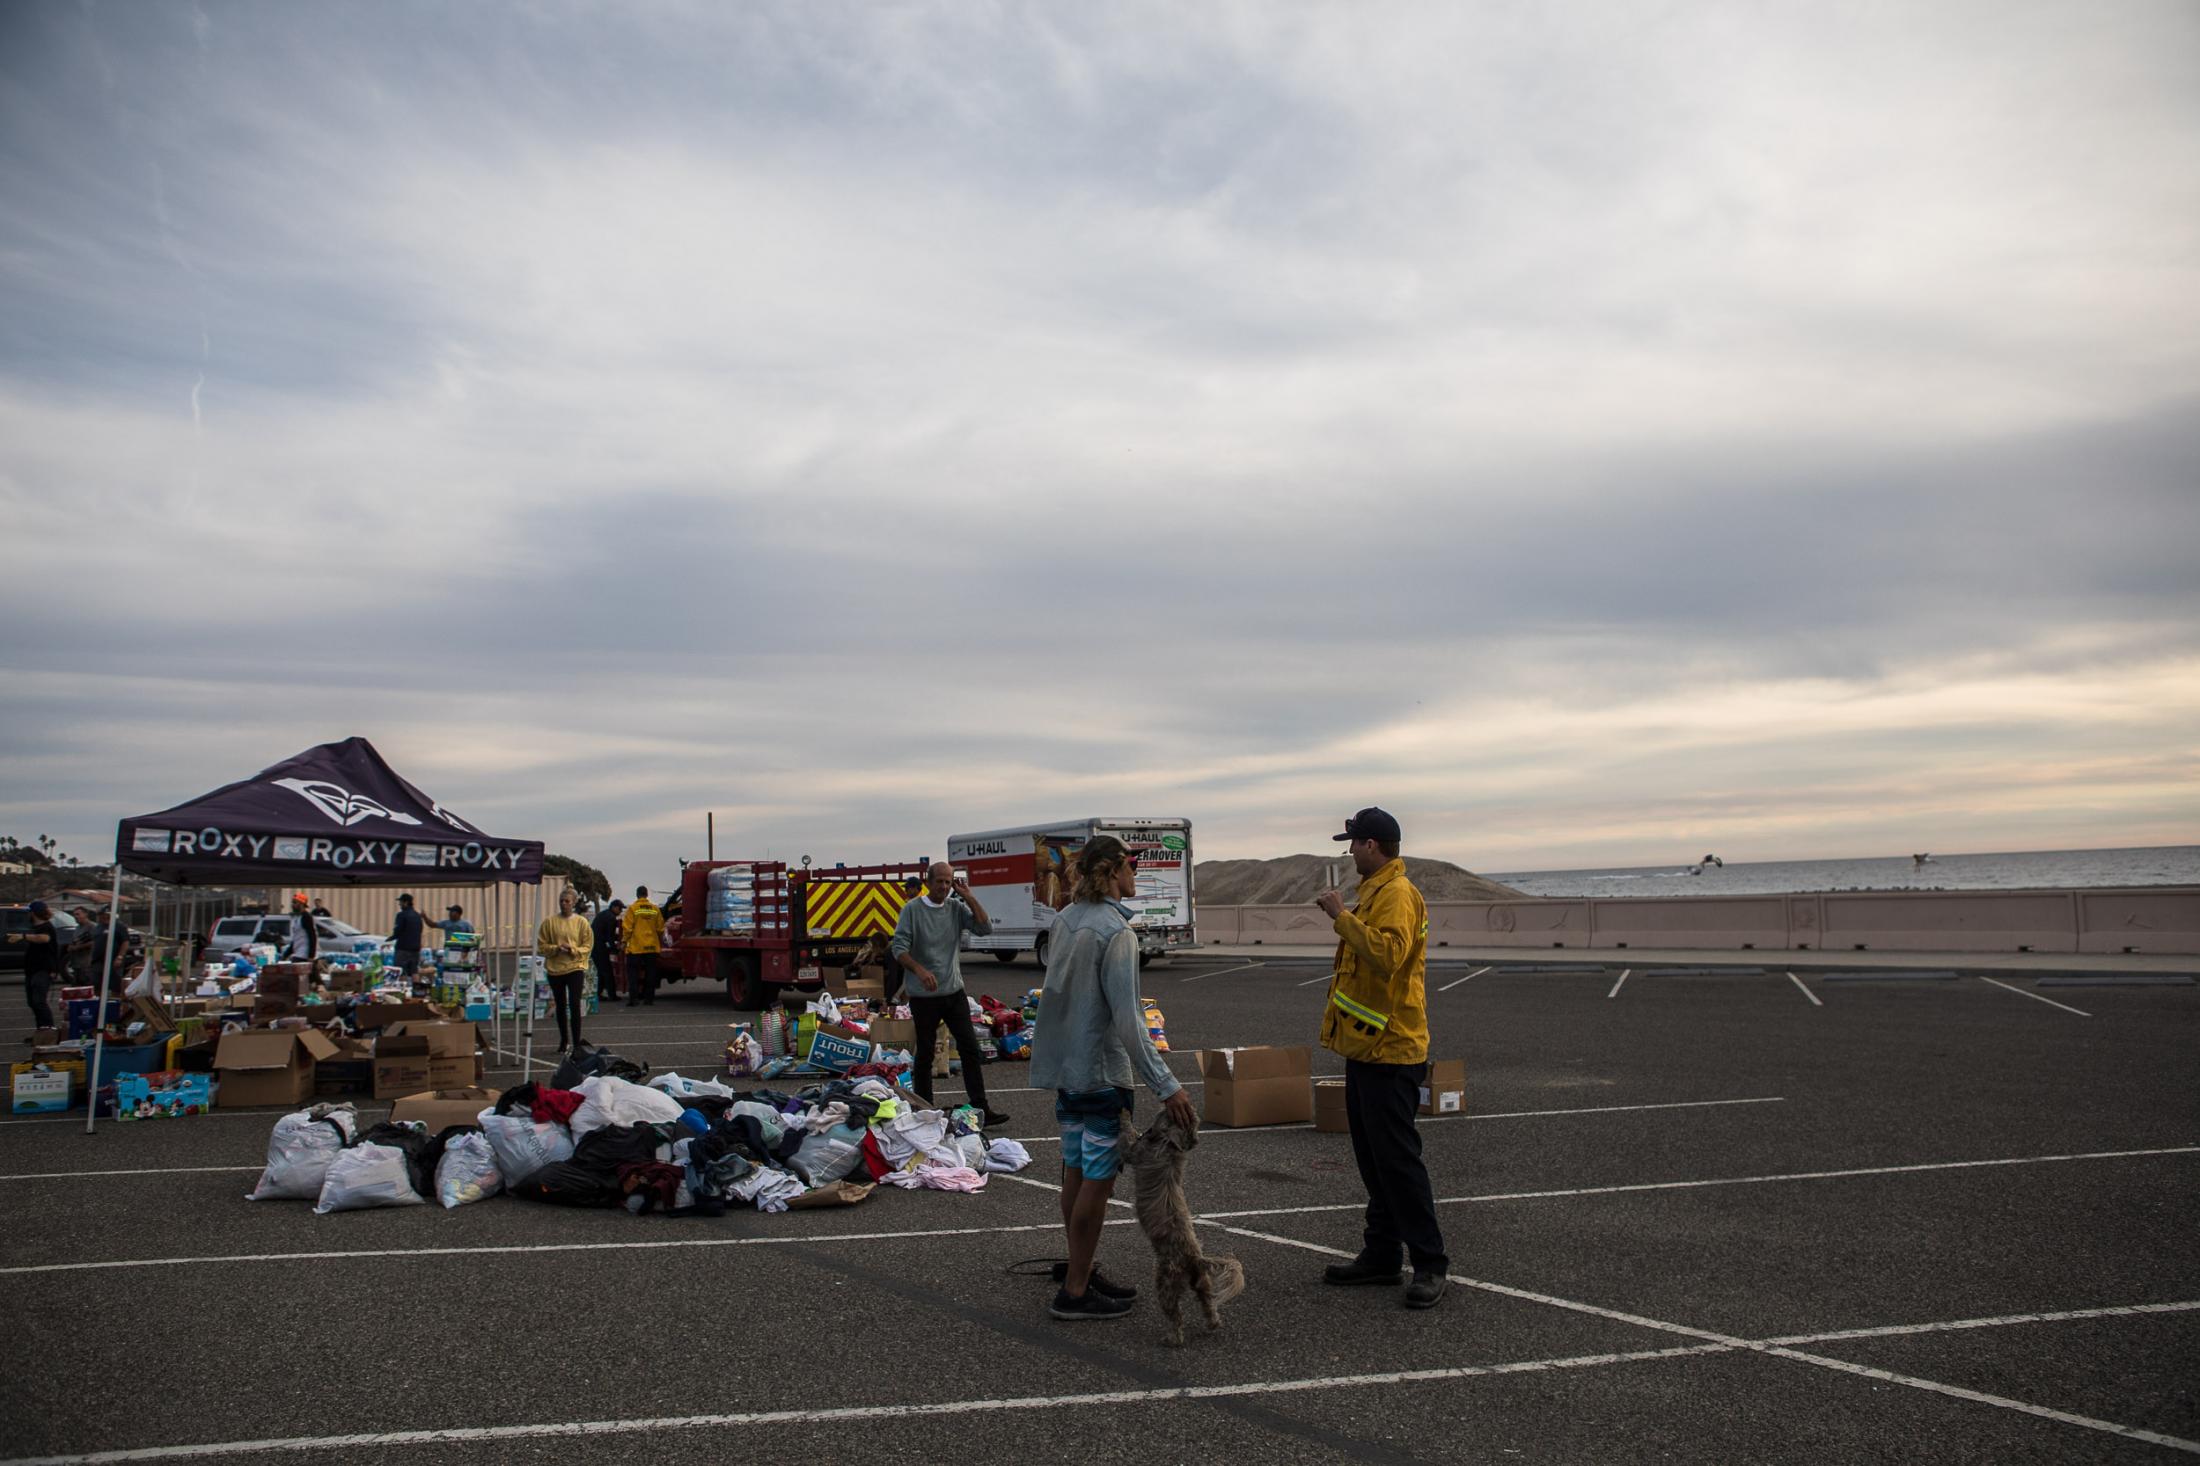  - Fire - Supplies left on Zuma beach for people who stayed. Many...